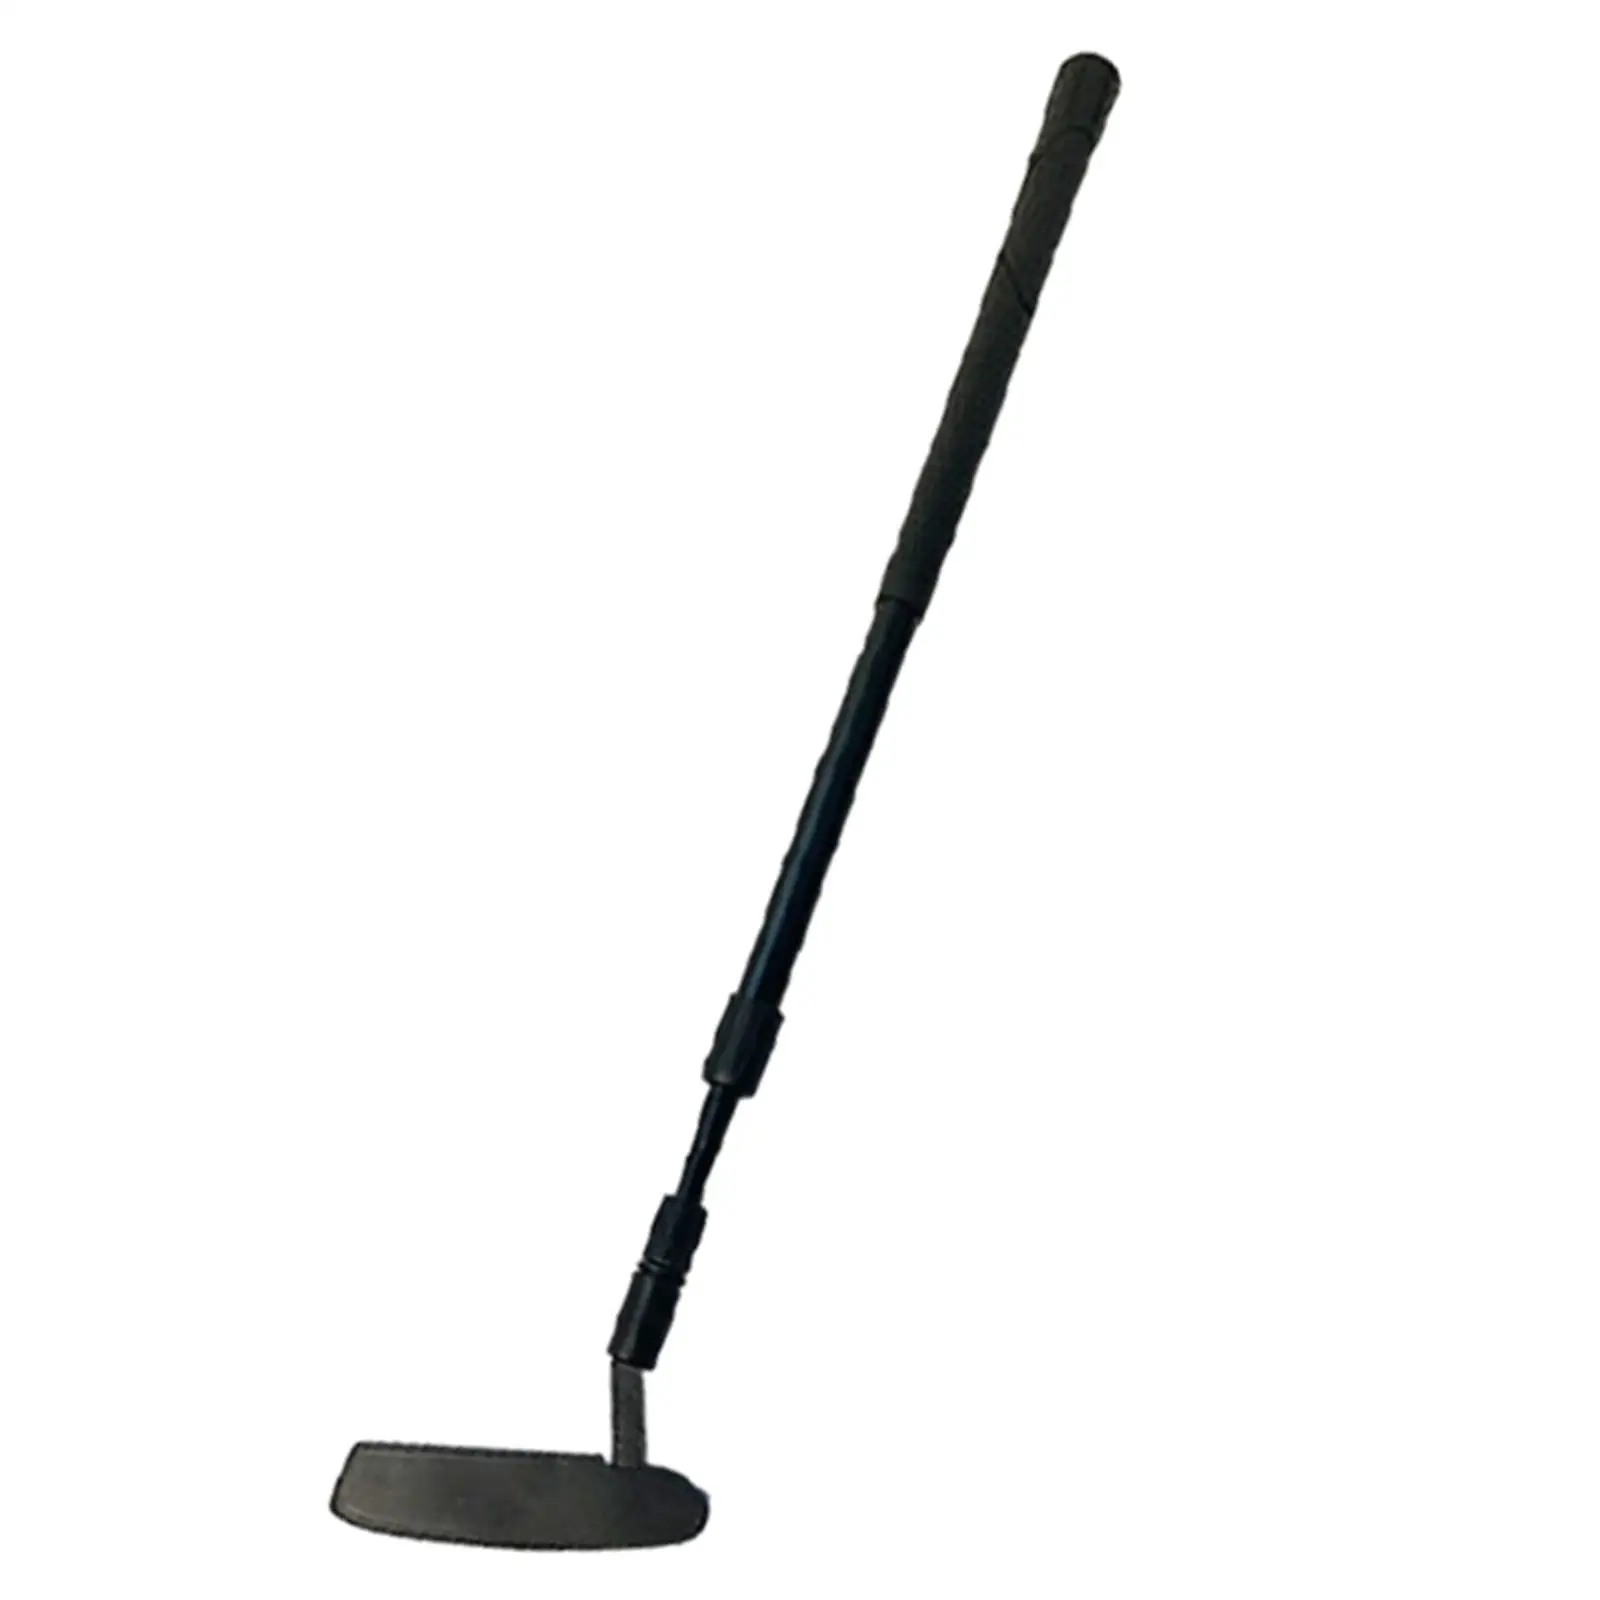 Golf Chipper Club Golf Wedge Adjustable Right or Left Hand Golf Accessory